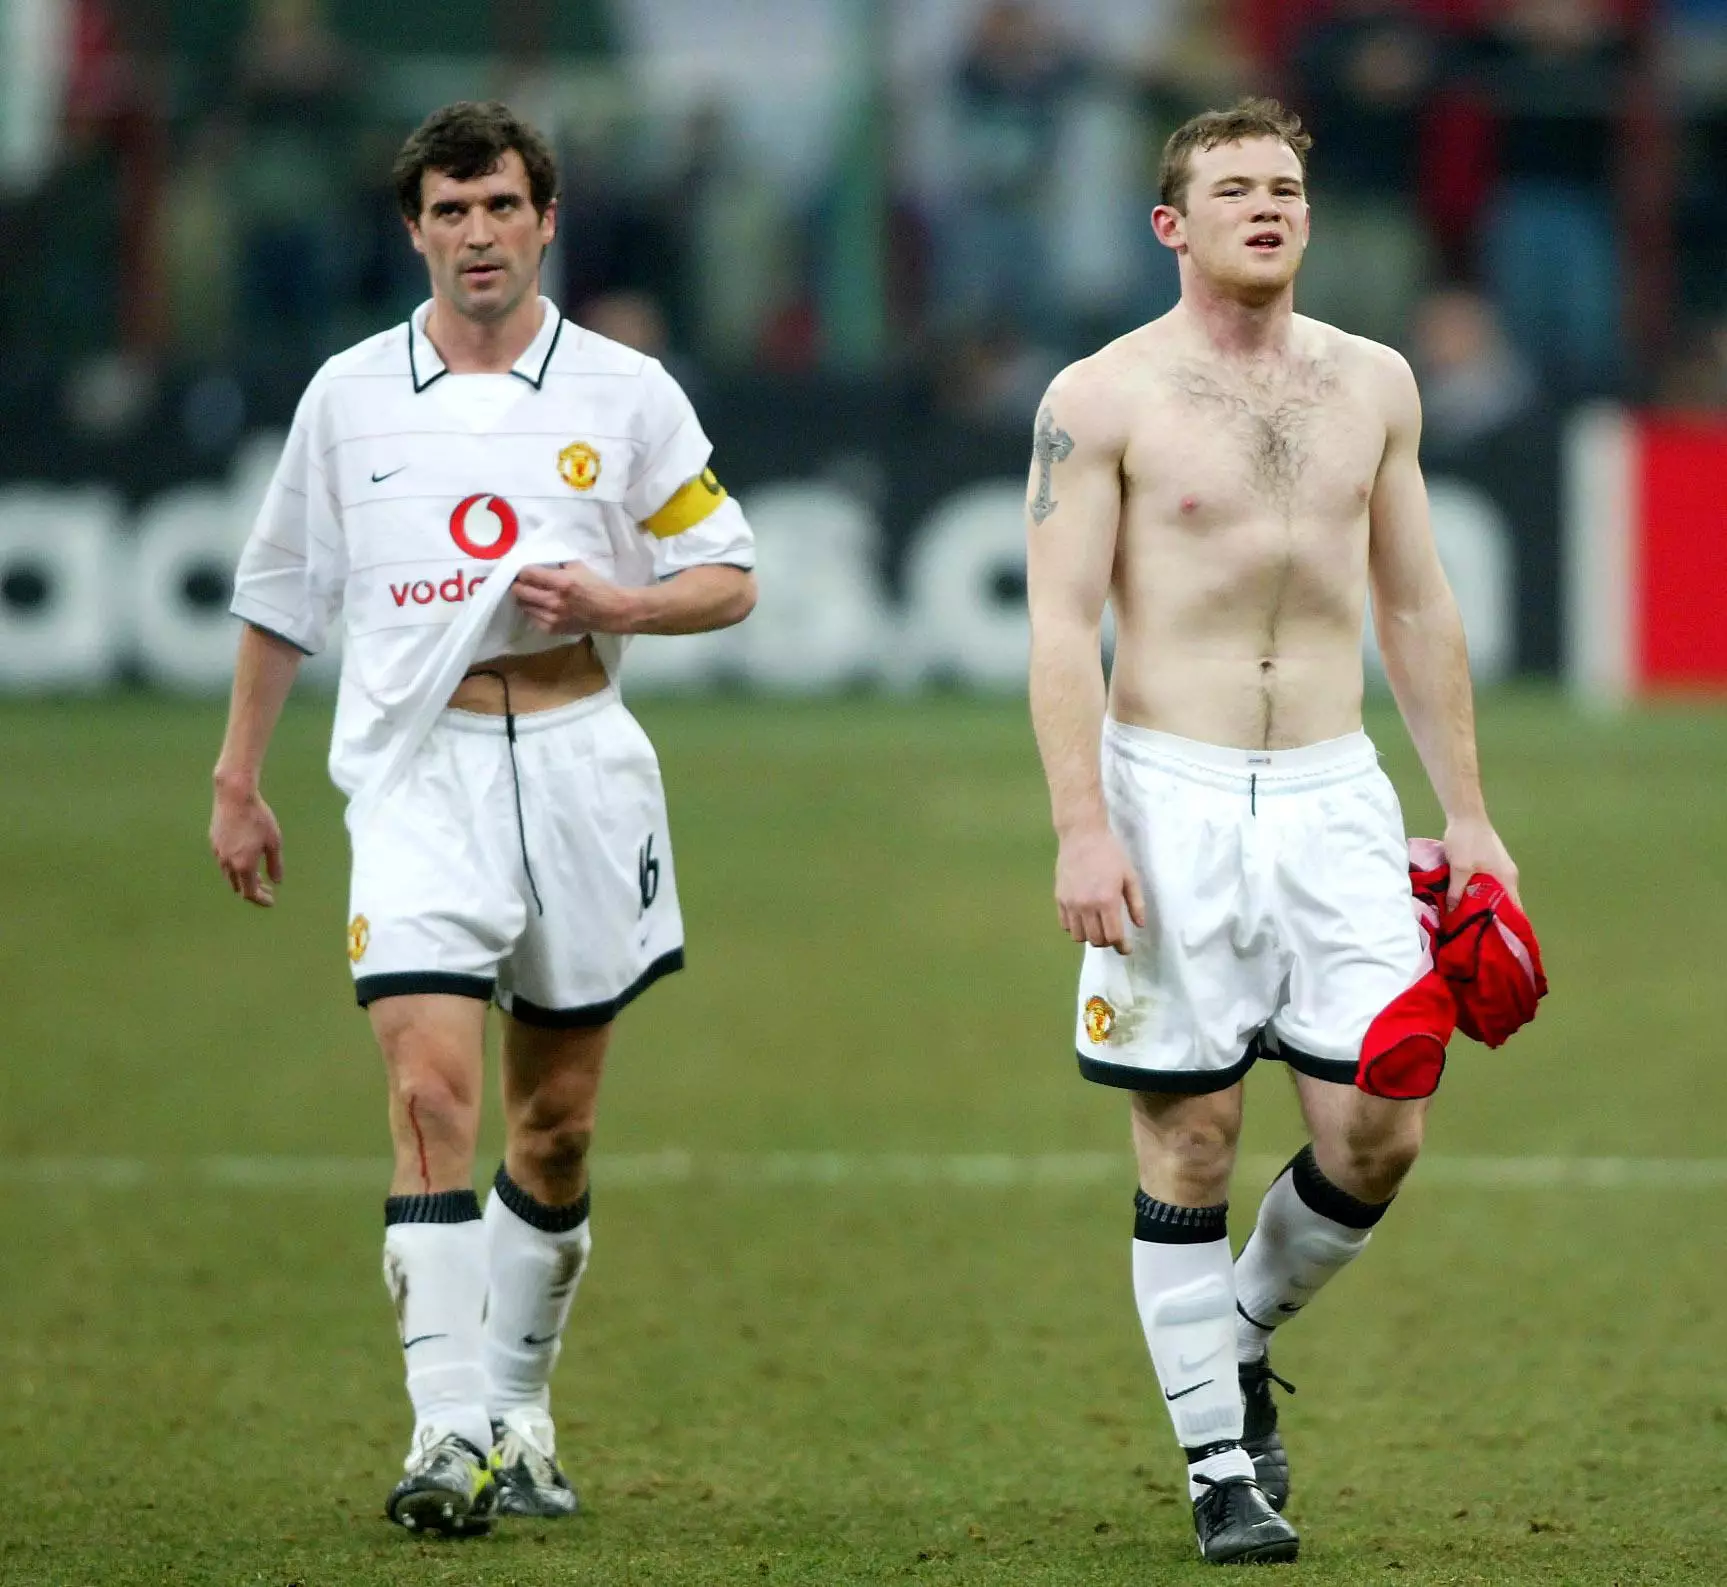 Keano says he didn't warm to Rooney in the same way he did with Cristiano Ronaldo. Image: PA